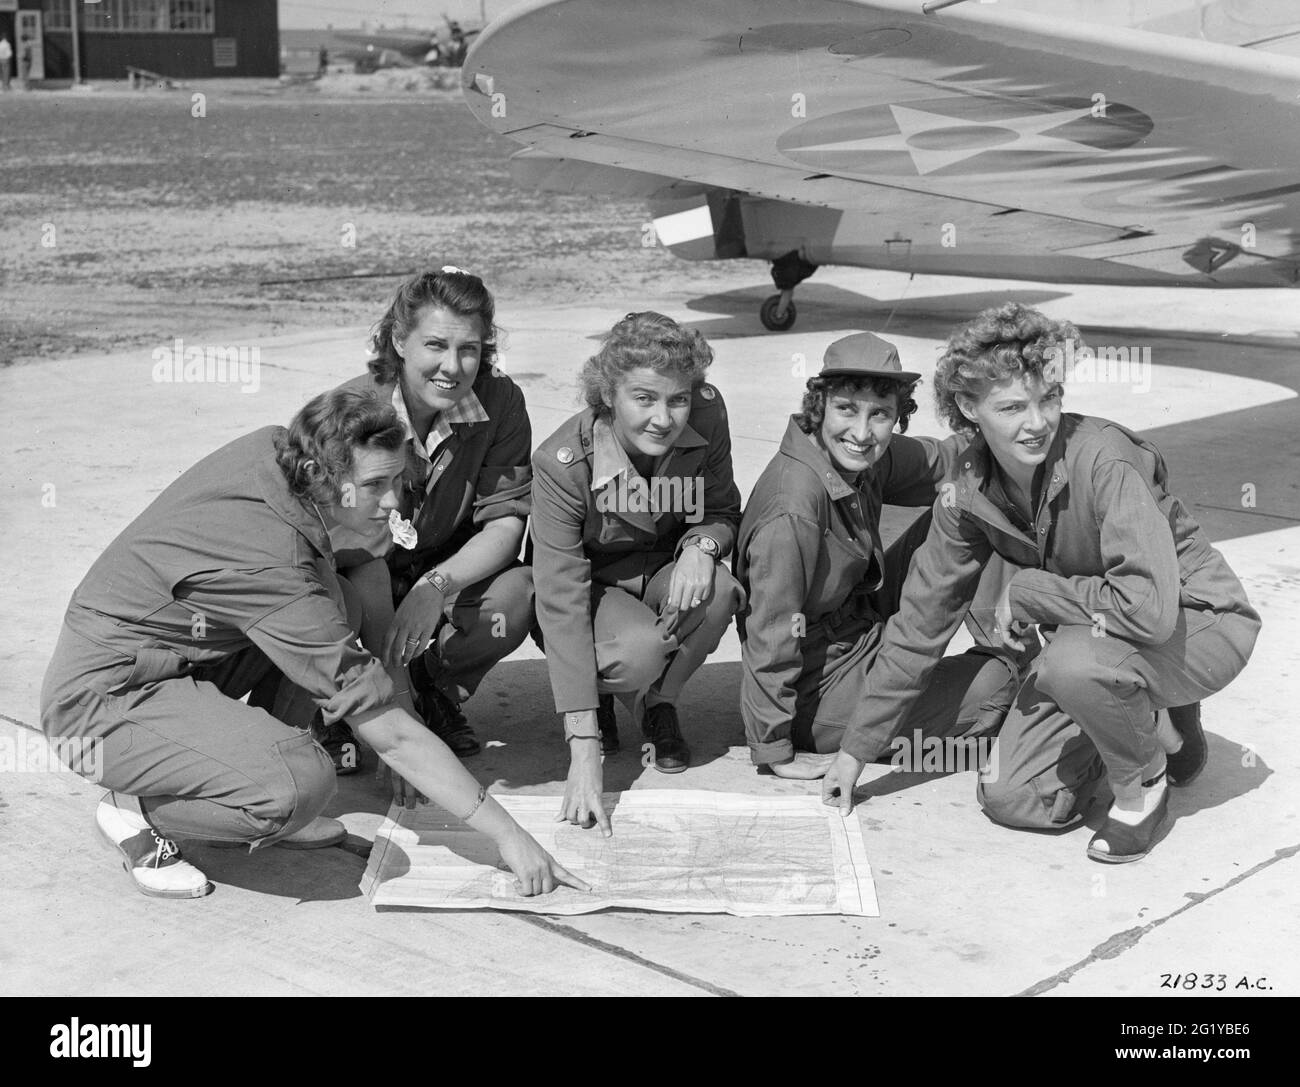 Group of Women's Auxiliary Ferrying Squadron (WAFS) pilots examining a navigational chart on the tarmac at New Castle Army Air Base. They are, from left to right, Gertrude Meserve, Catherine Slocum, WAFS Director Nancy Harkness Love, Adela Scharr and Barbara Towne, Wilmington, DE, 10/1/1942. (Photo by Ralph Morgan/United States Army Air Force/RBM Vintage Images) Stock Photo